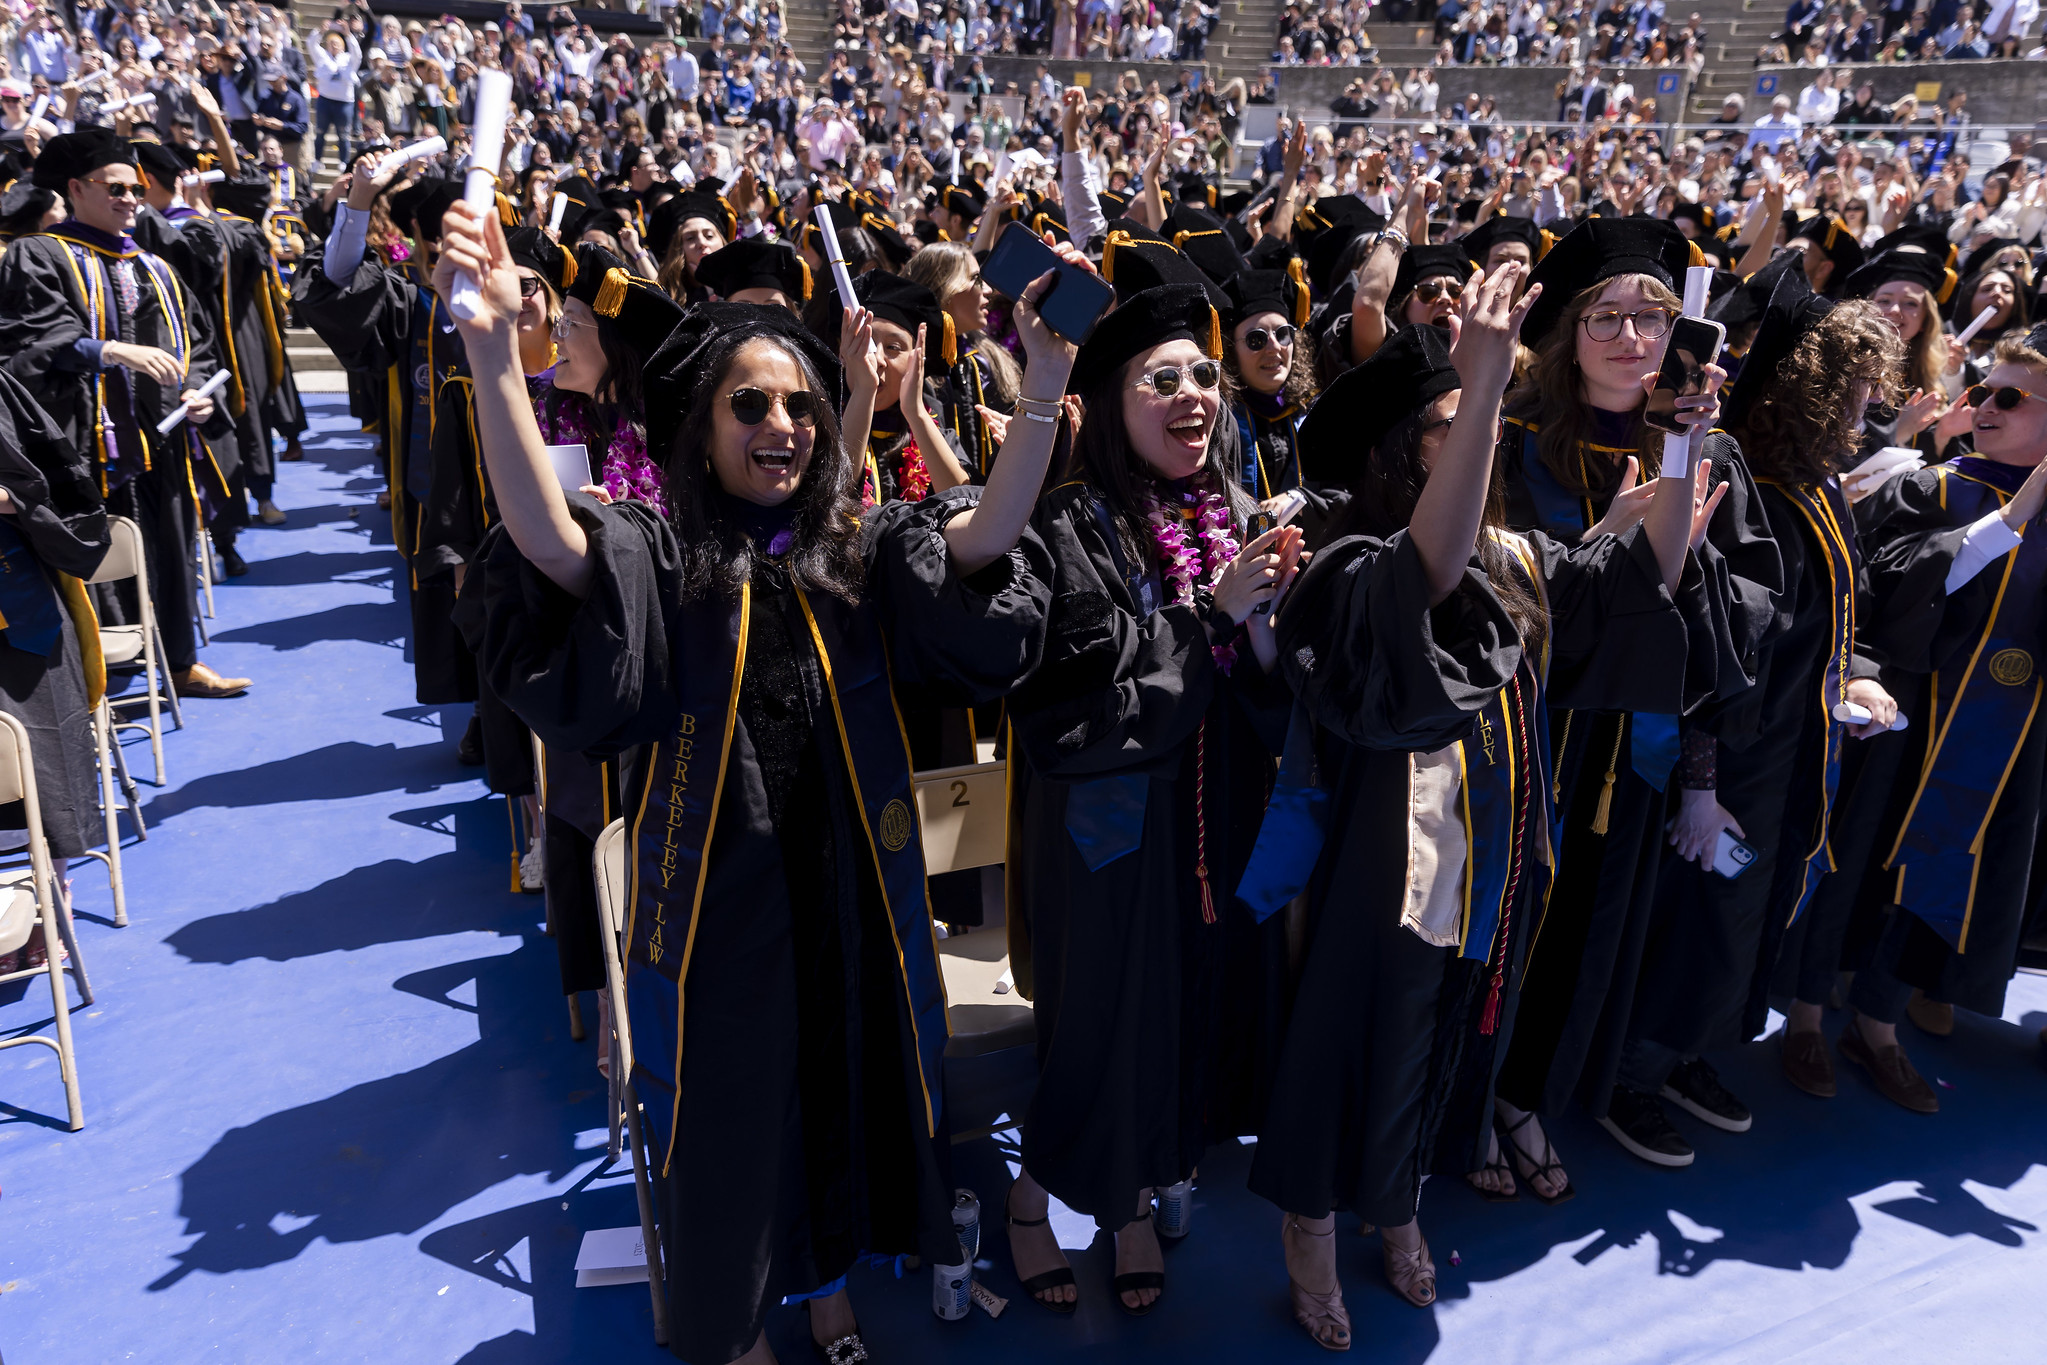 Students in regalia in audience at commencement in the Greek Theatre